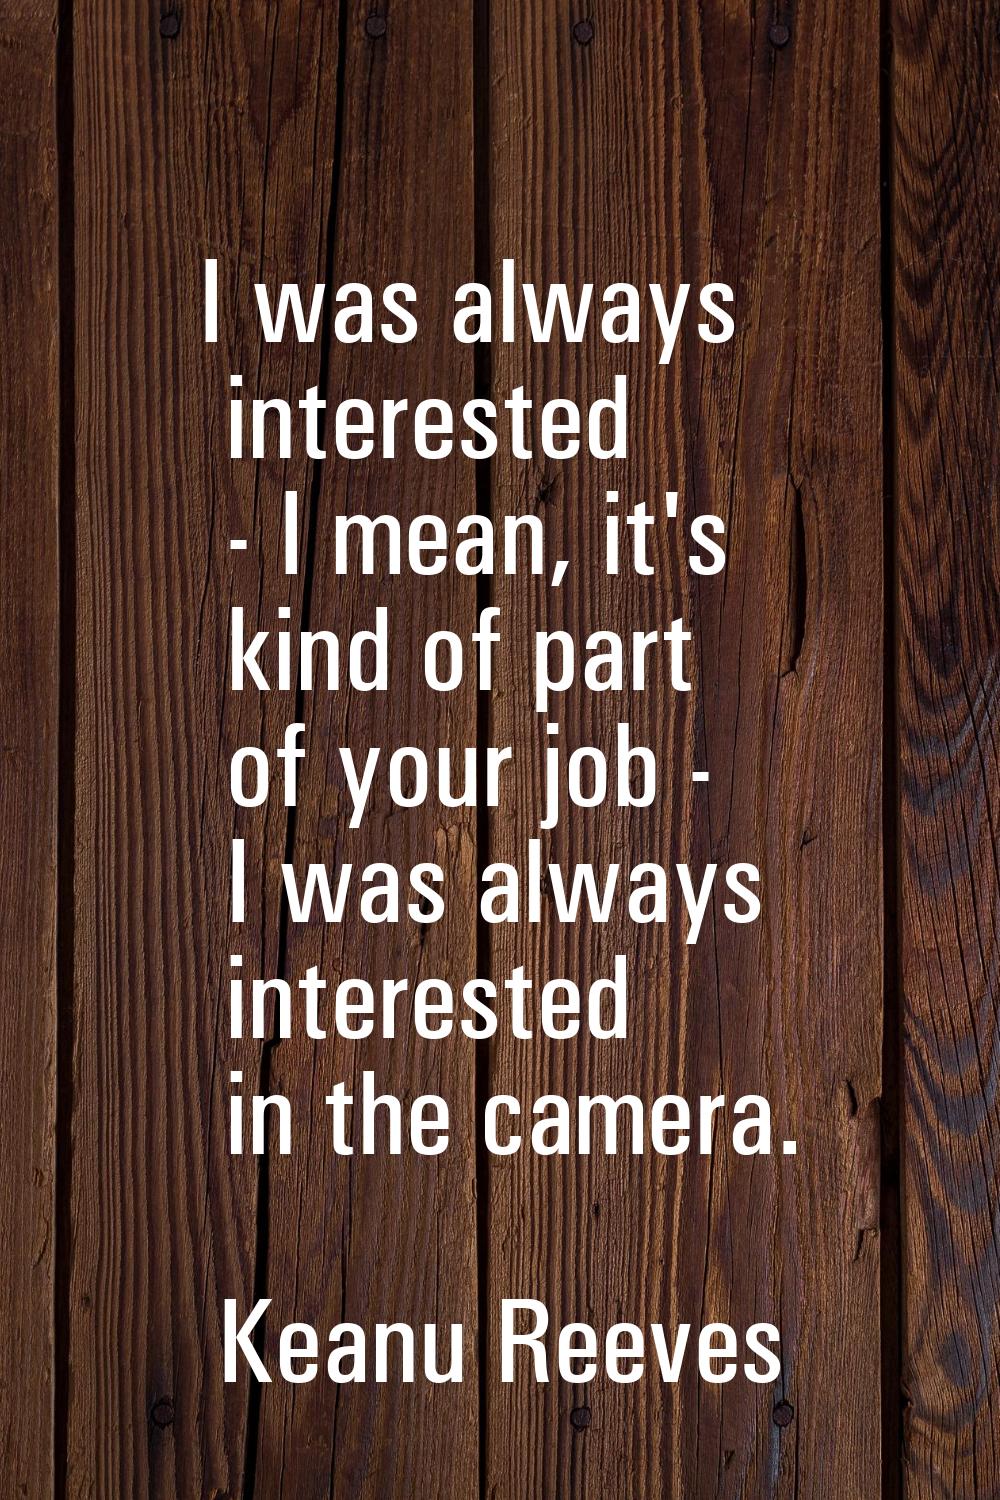 I was always interested - I mean, it's kind of part of your job - I was always interested in the ca